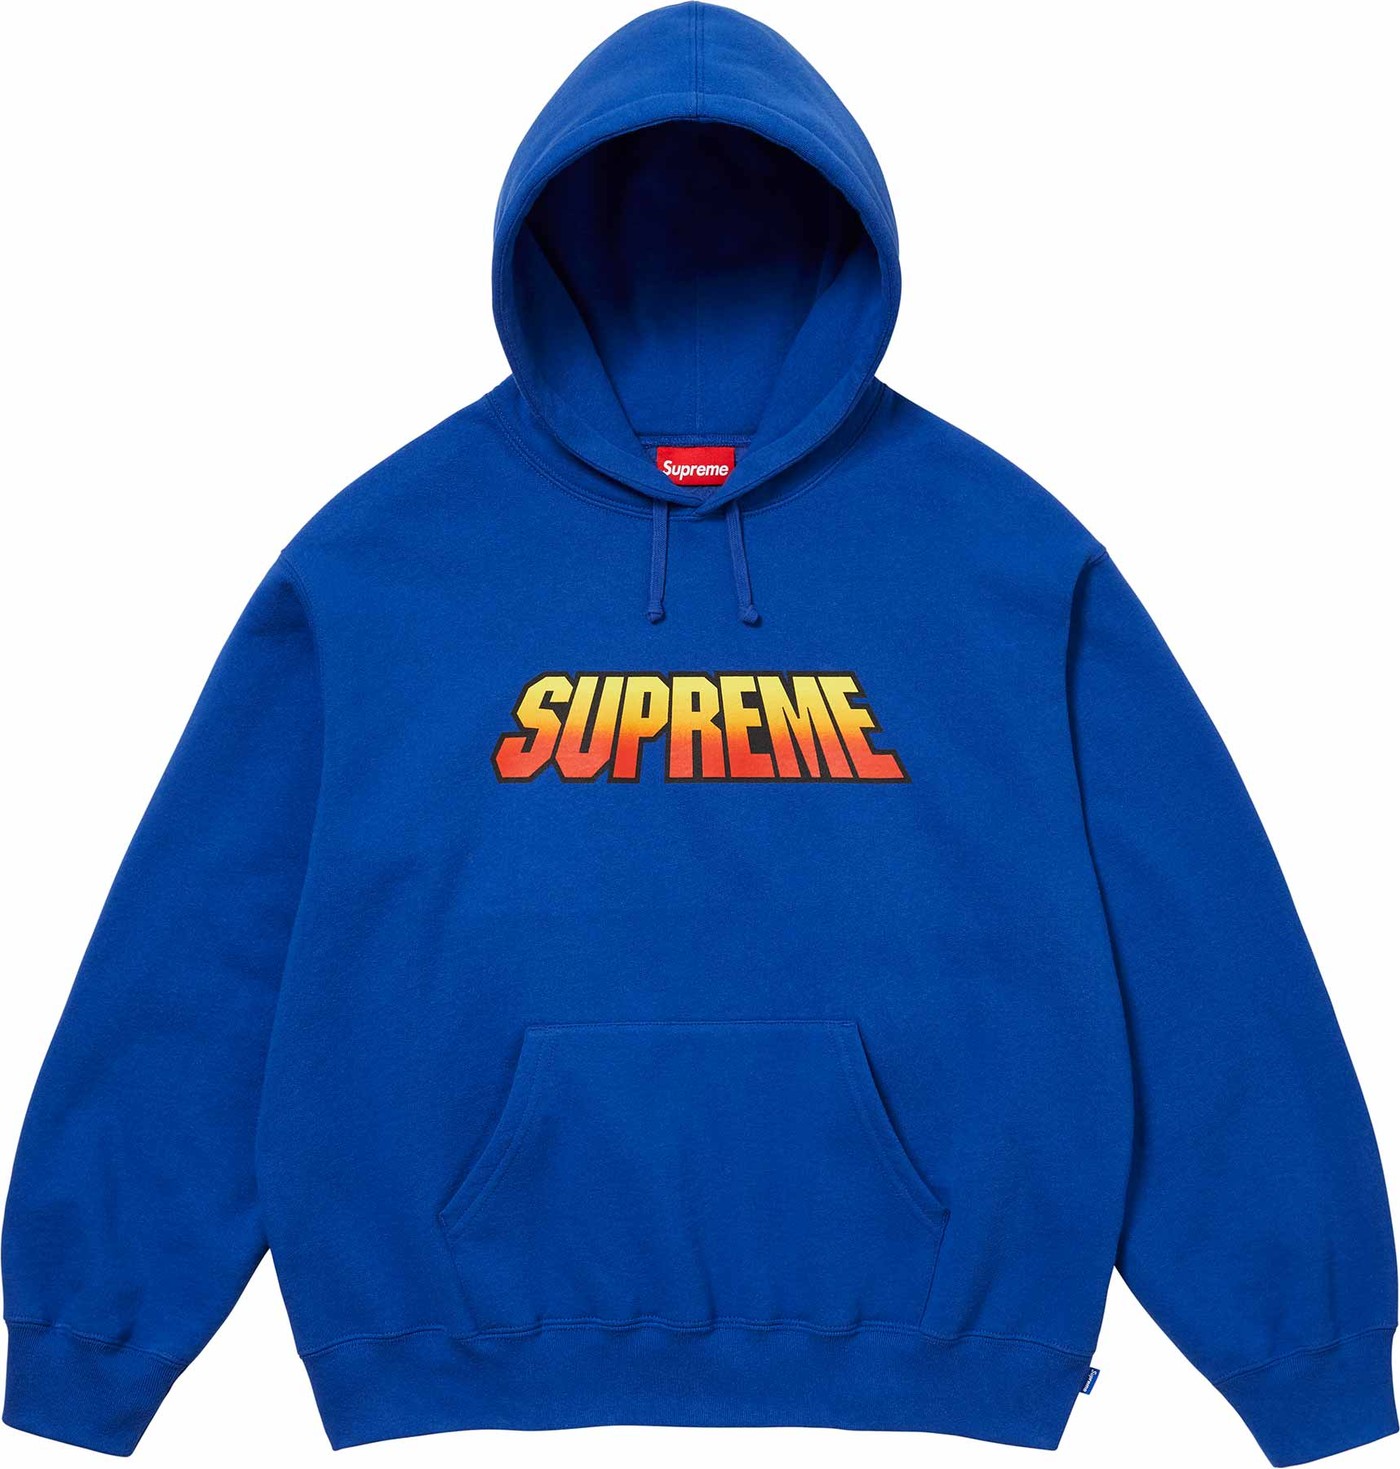 Supreme Thermal Zip Up Sweatshirt Dusty Blue. LARGE BRAND NEW WITH TAG &  BAG